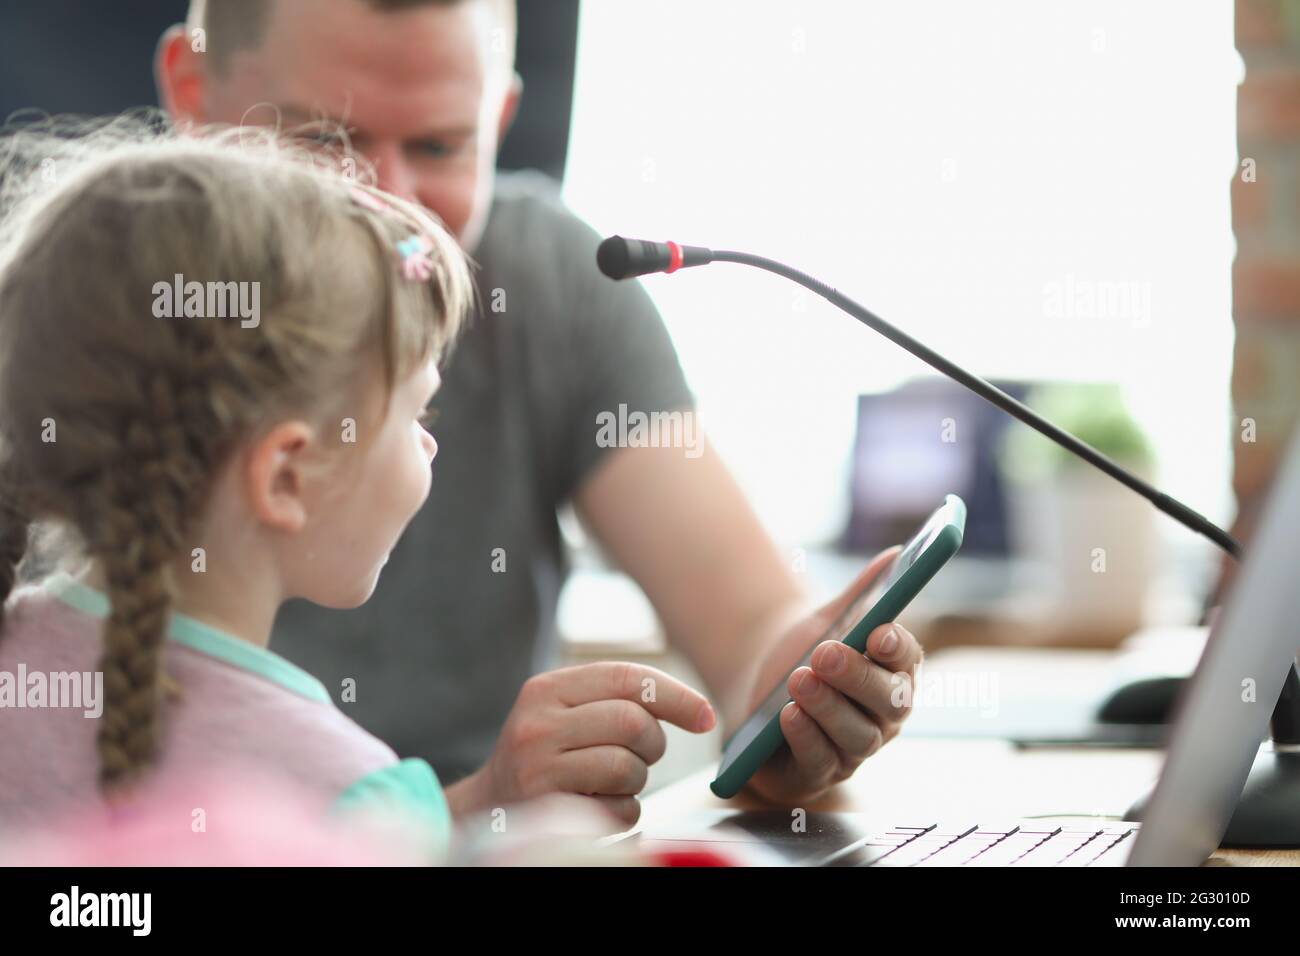 Male programmer shows little girl game on smartphone for testing Stock Photo